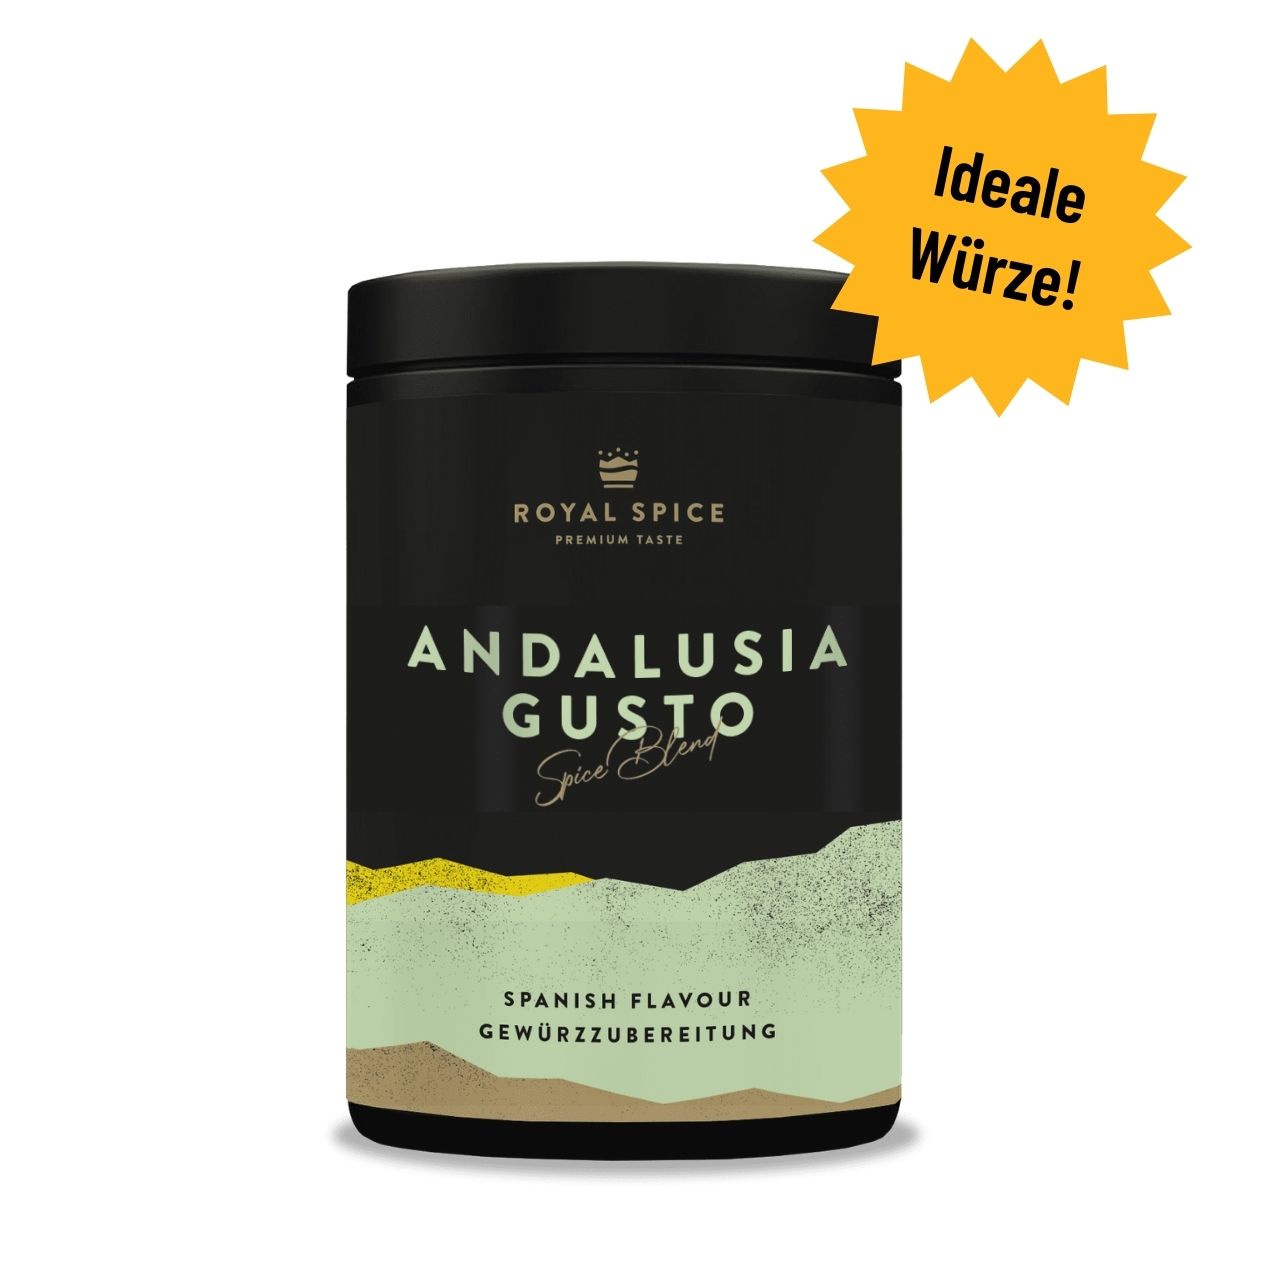 Royal Spice - Andalusia Gusto, 350 g